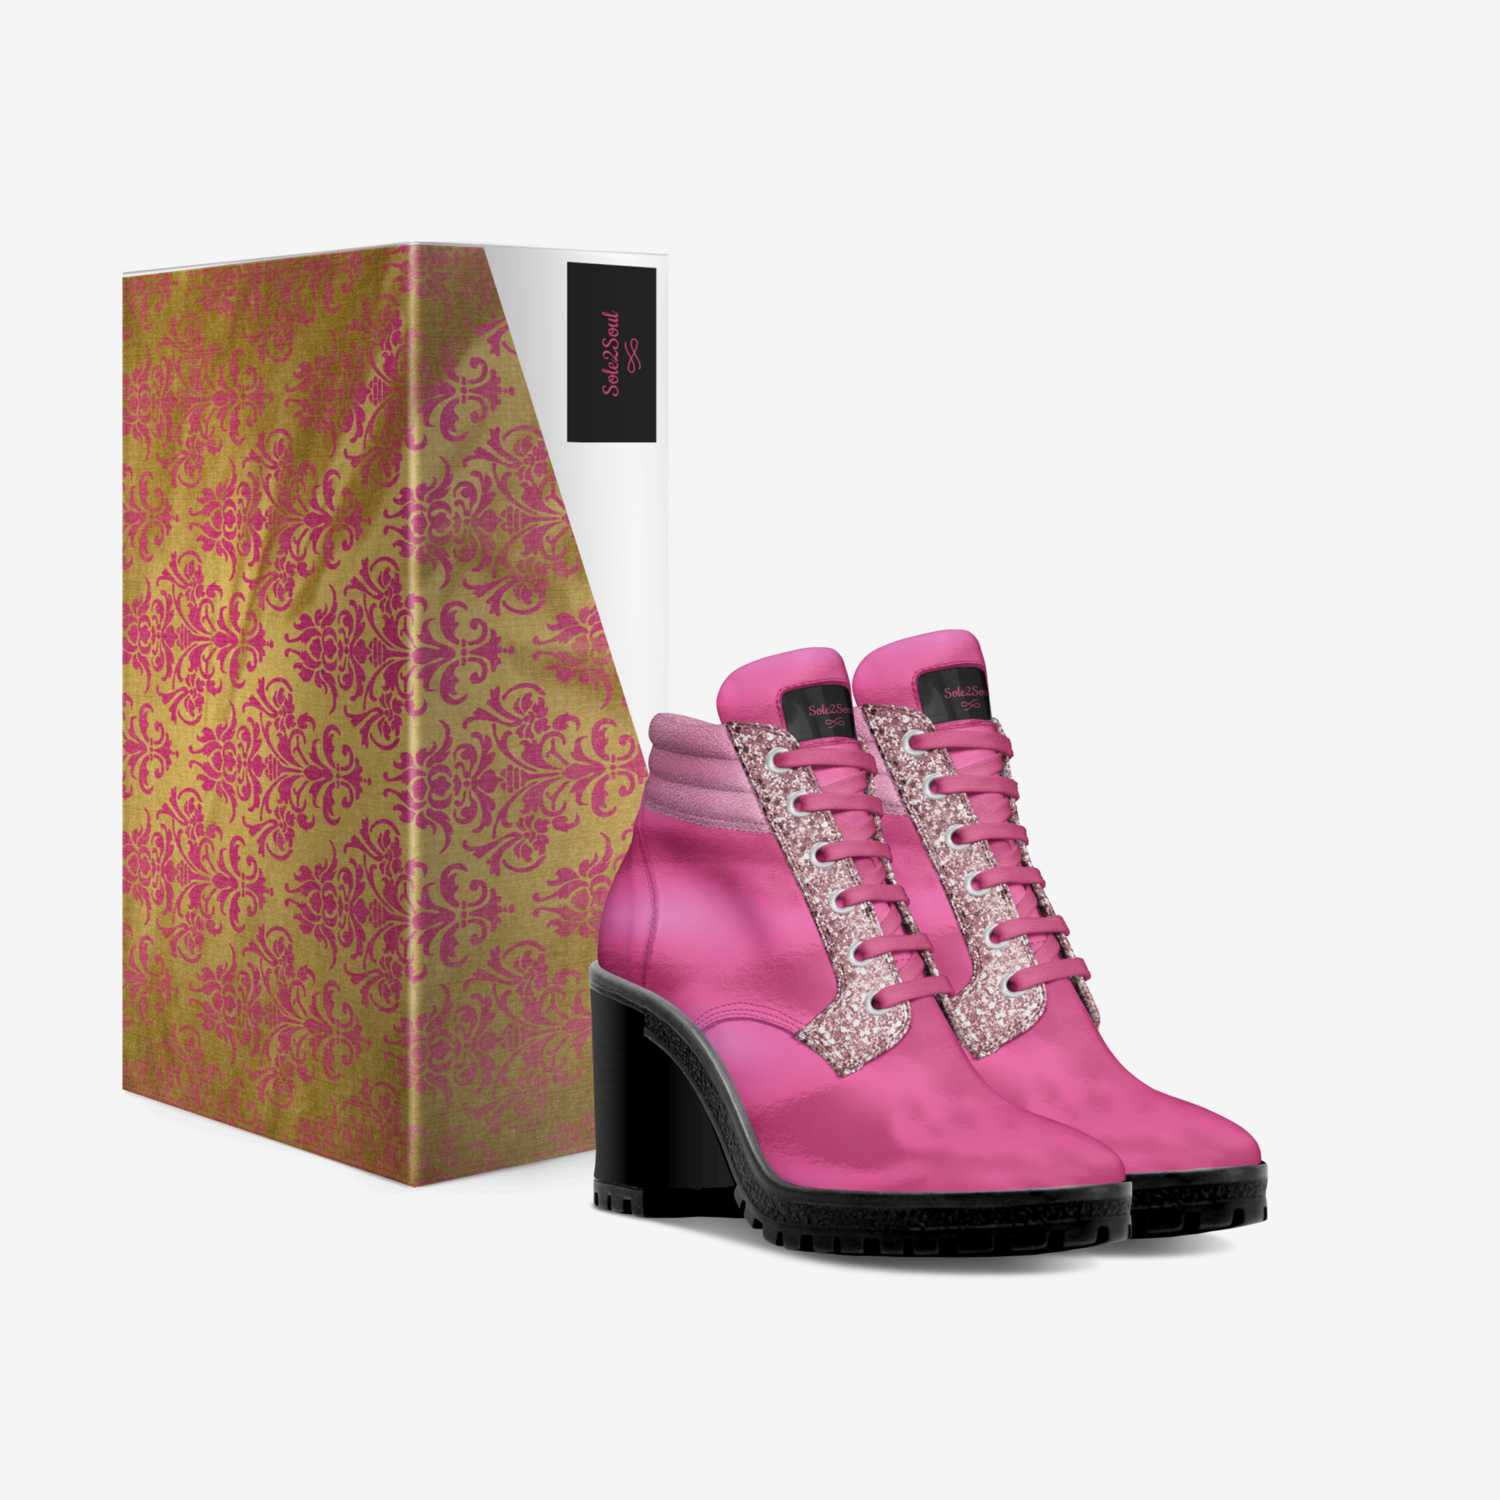 Femme Fatale custom made in Italy shoes by Bill Pish | Box view